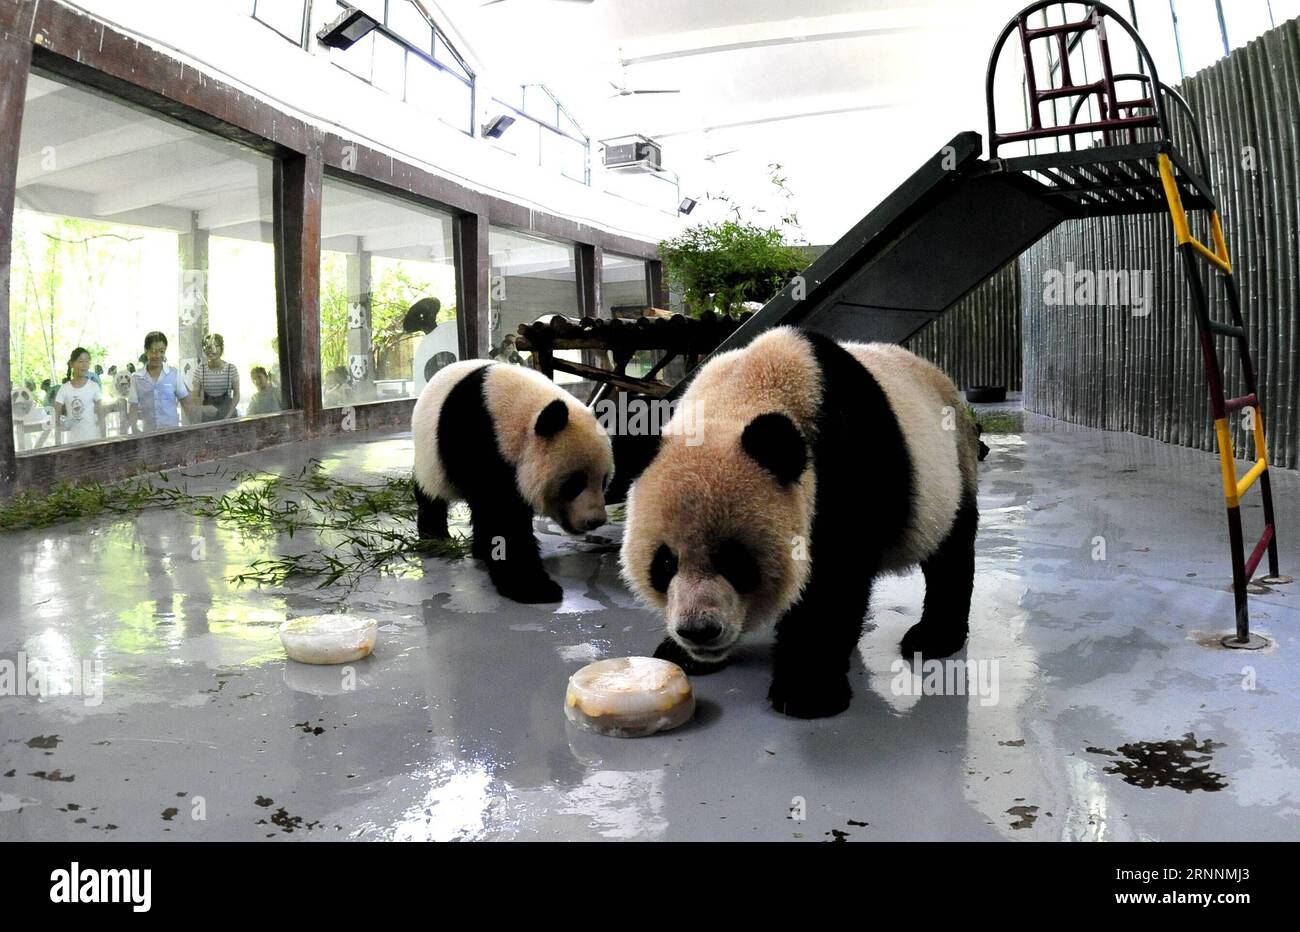 (170721) -- SHANGHAI, July 21, 2017 -- Giant pandas enjoy ice cubes inside an air-conditioned enclosure at Shanghai Zoo in east China s Shanghai, July 21, 2017. The meteorological department of east China metropolis Shanghai recorded an air temperature of 40.9 degrees Celsius (105.6 degrees Fahrenheit) at around 2 p.m. Friday, the highest on record in the city in 145 years. The Shanghai Zoo has took many measures to keep the animals cool. ) (lb) CHINA-SHANGHAI-ANIMAL-SUMMER HEAT (CN) ZhangxJiansong PUBLICATIONxNOTxINxCHN   Shanghai July 21 2017 Giant Pandas Enjoy ICE Cubes Inside to Air condit Stock Photo